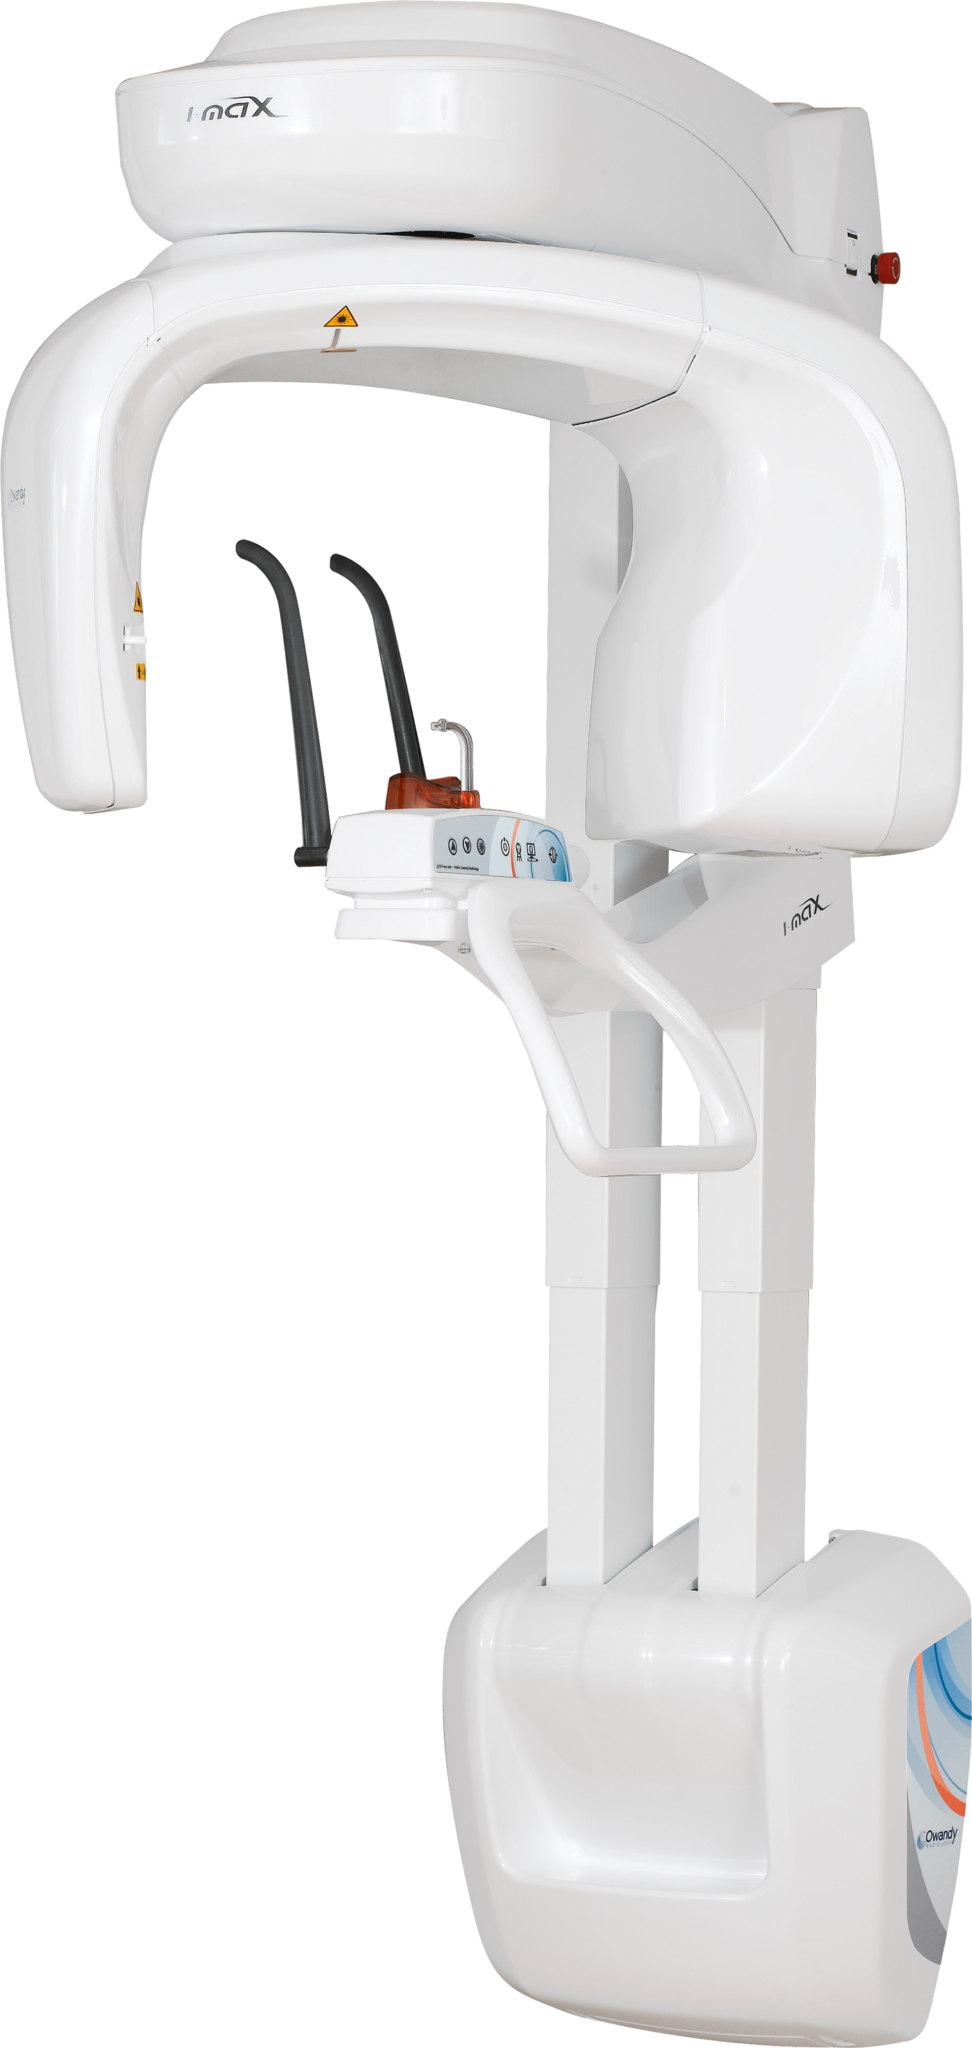 Owandy Imax Digital Panoramic Imaging System From Quality Dental